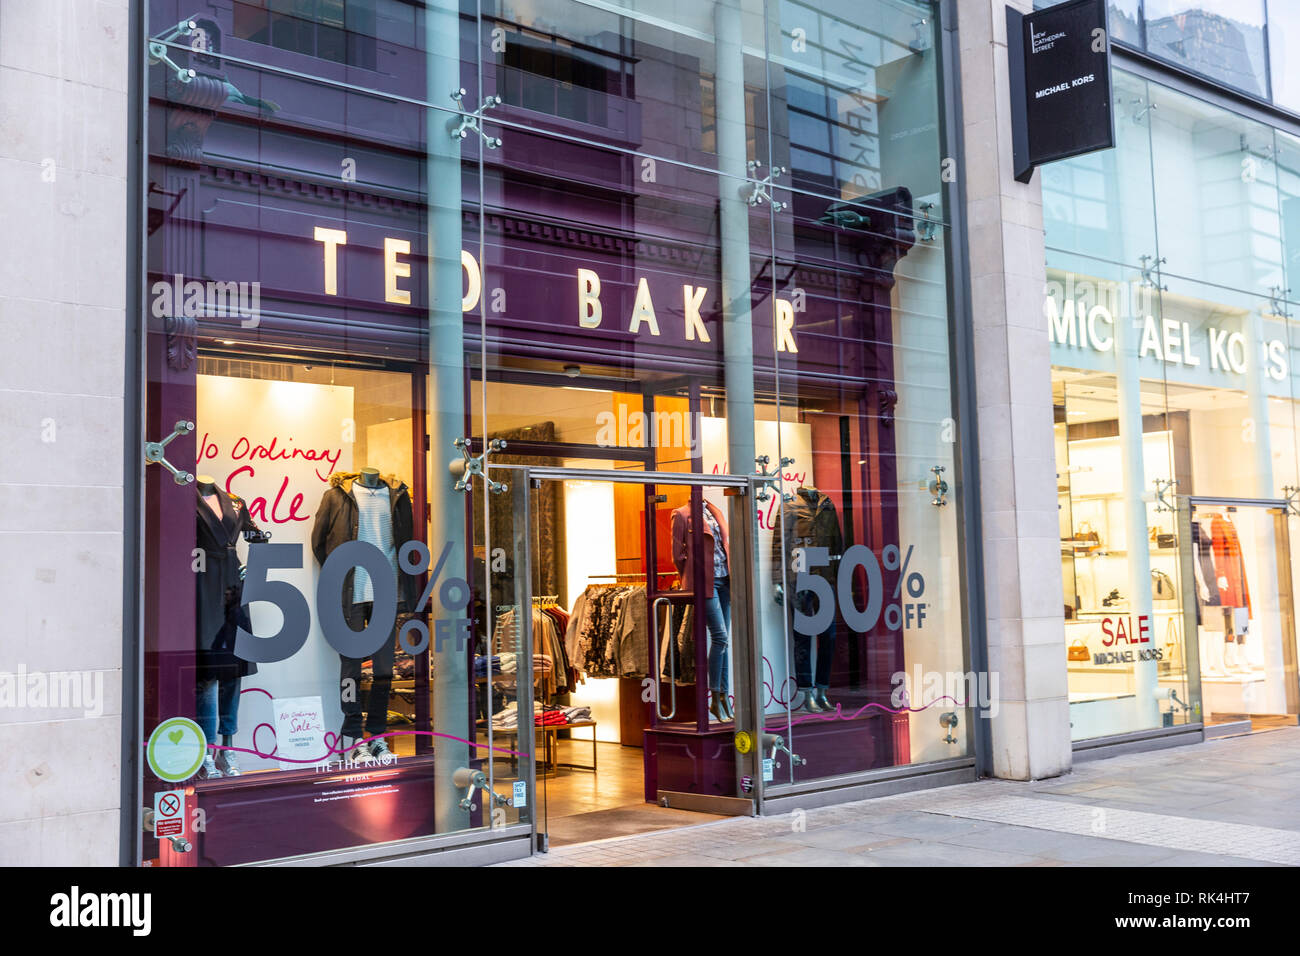 Ted Baker and Michael Kors stores and shopfronts in New Cathedral  Street,Manchester city centre,England Stock Photo - Alamy